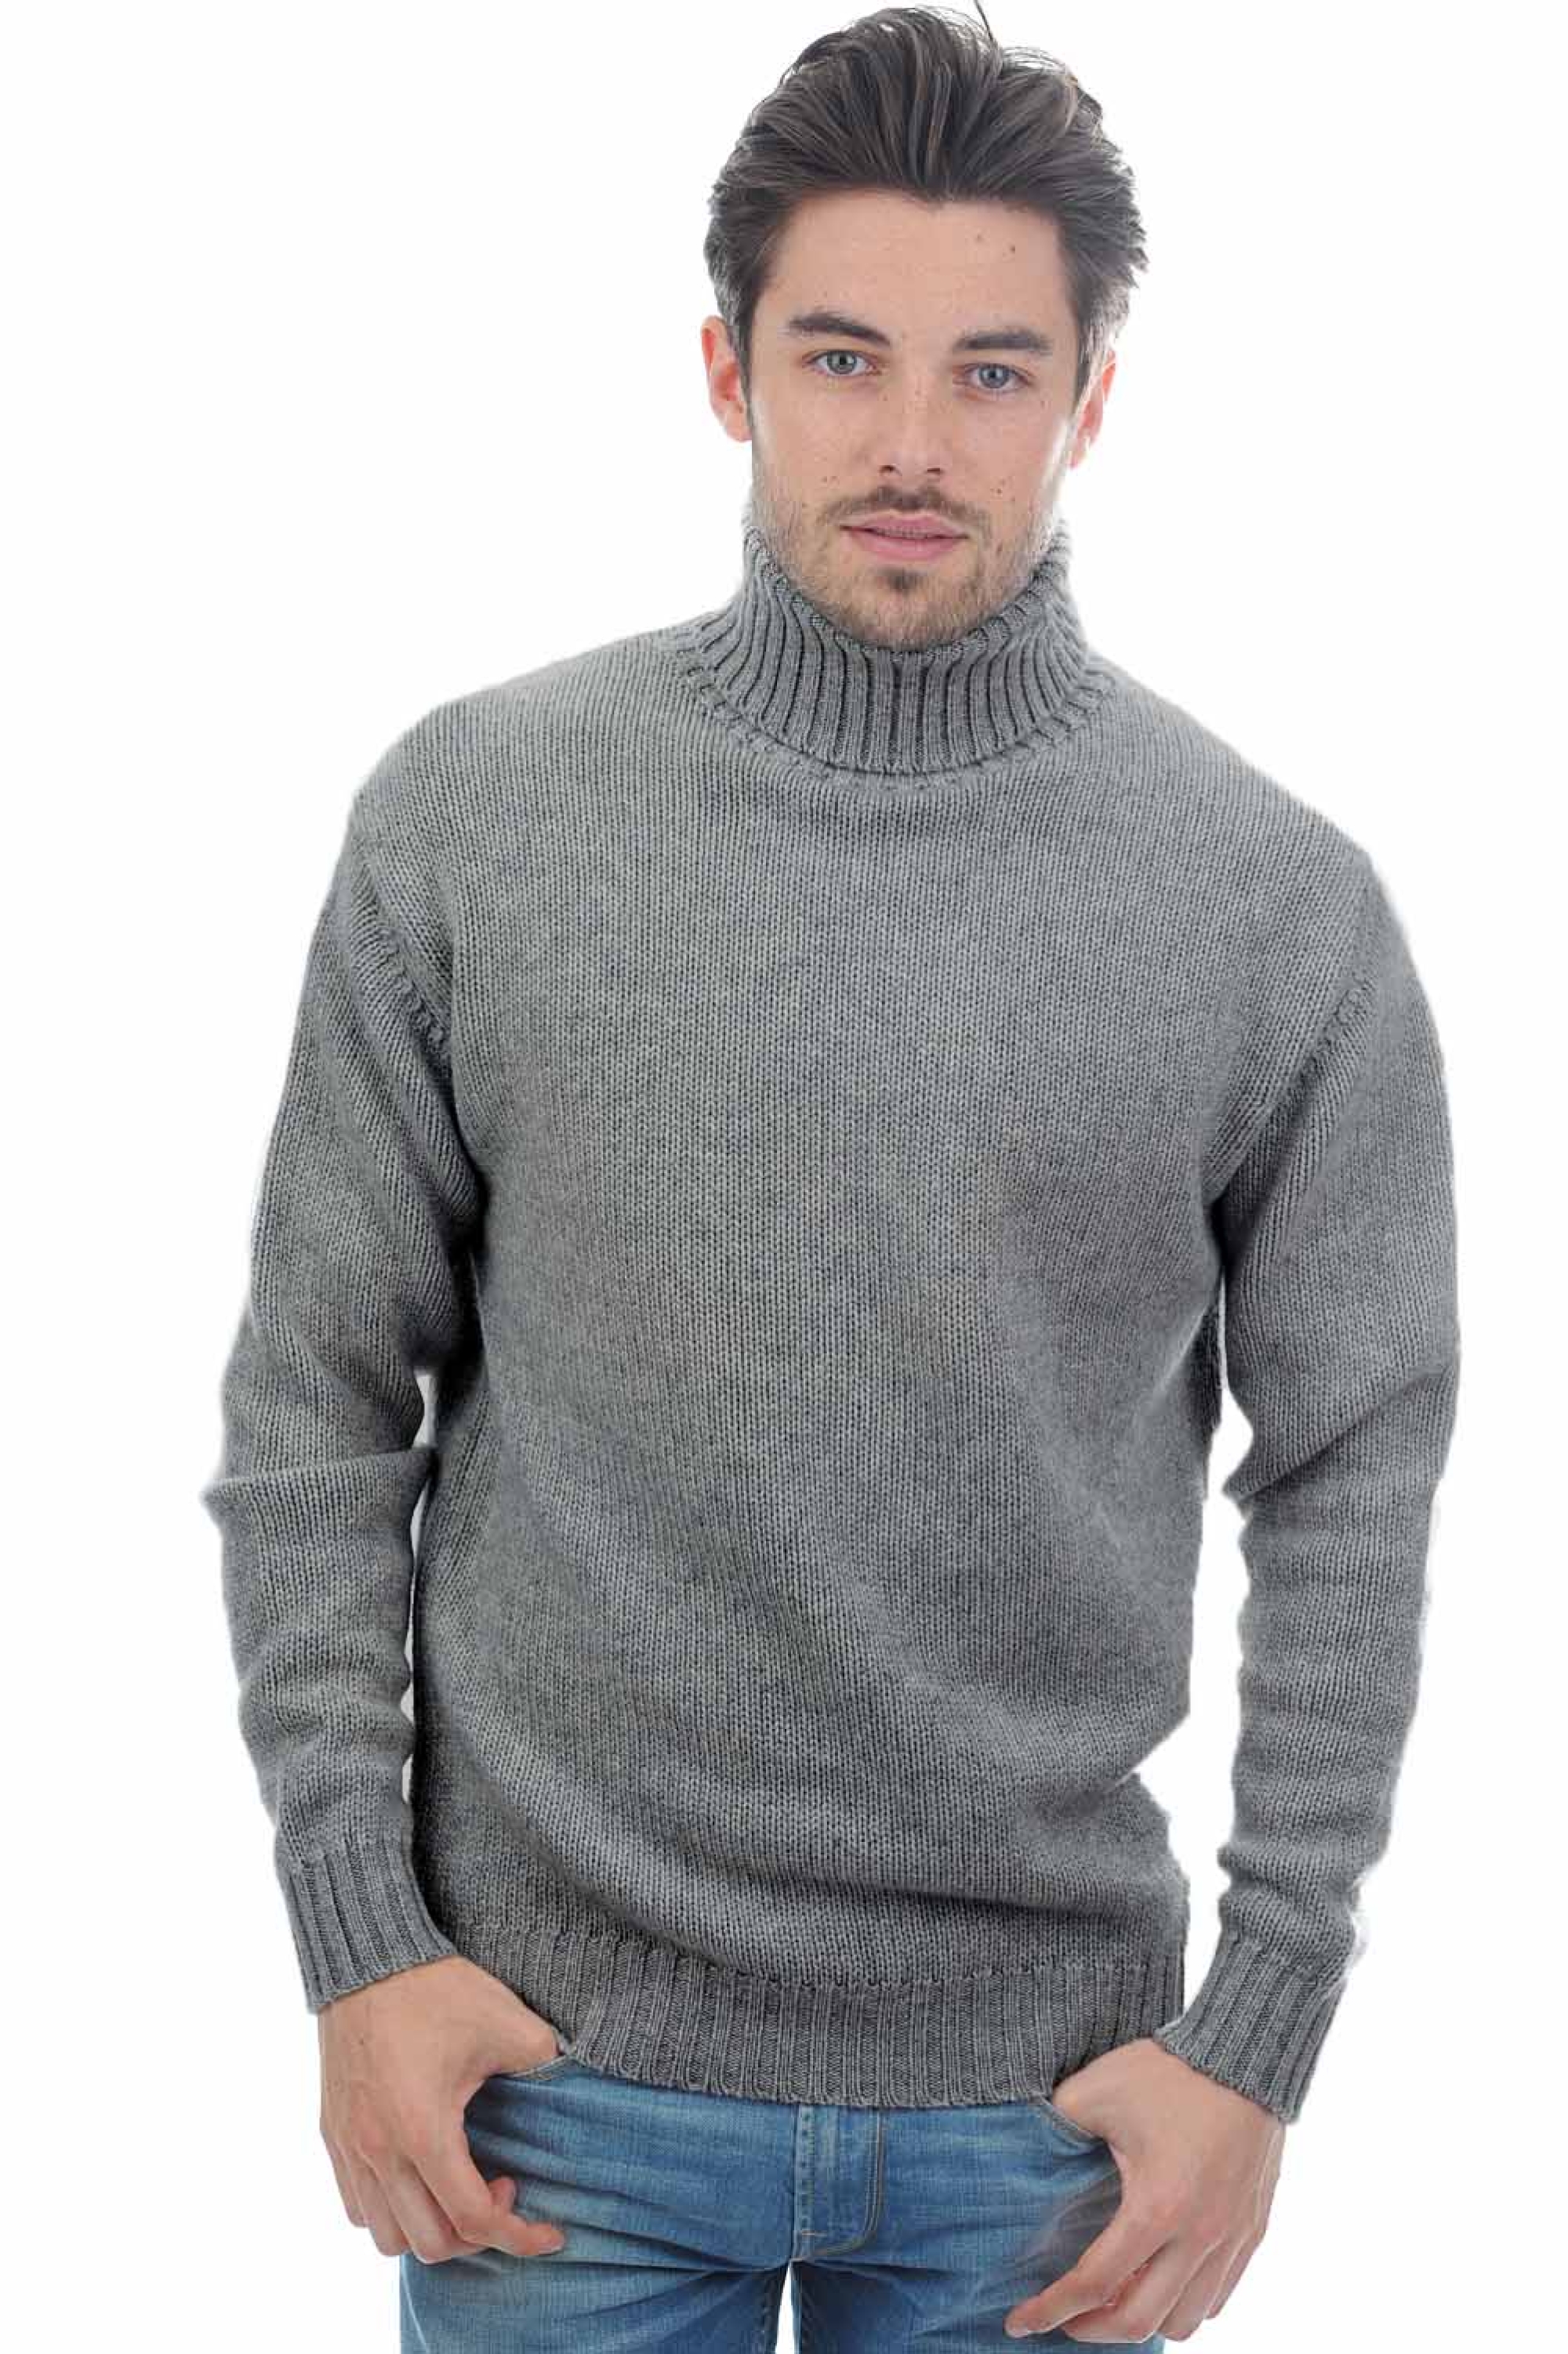 Cashmere men chunky sweater achille grey marl 2xl